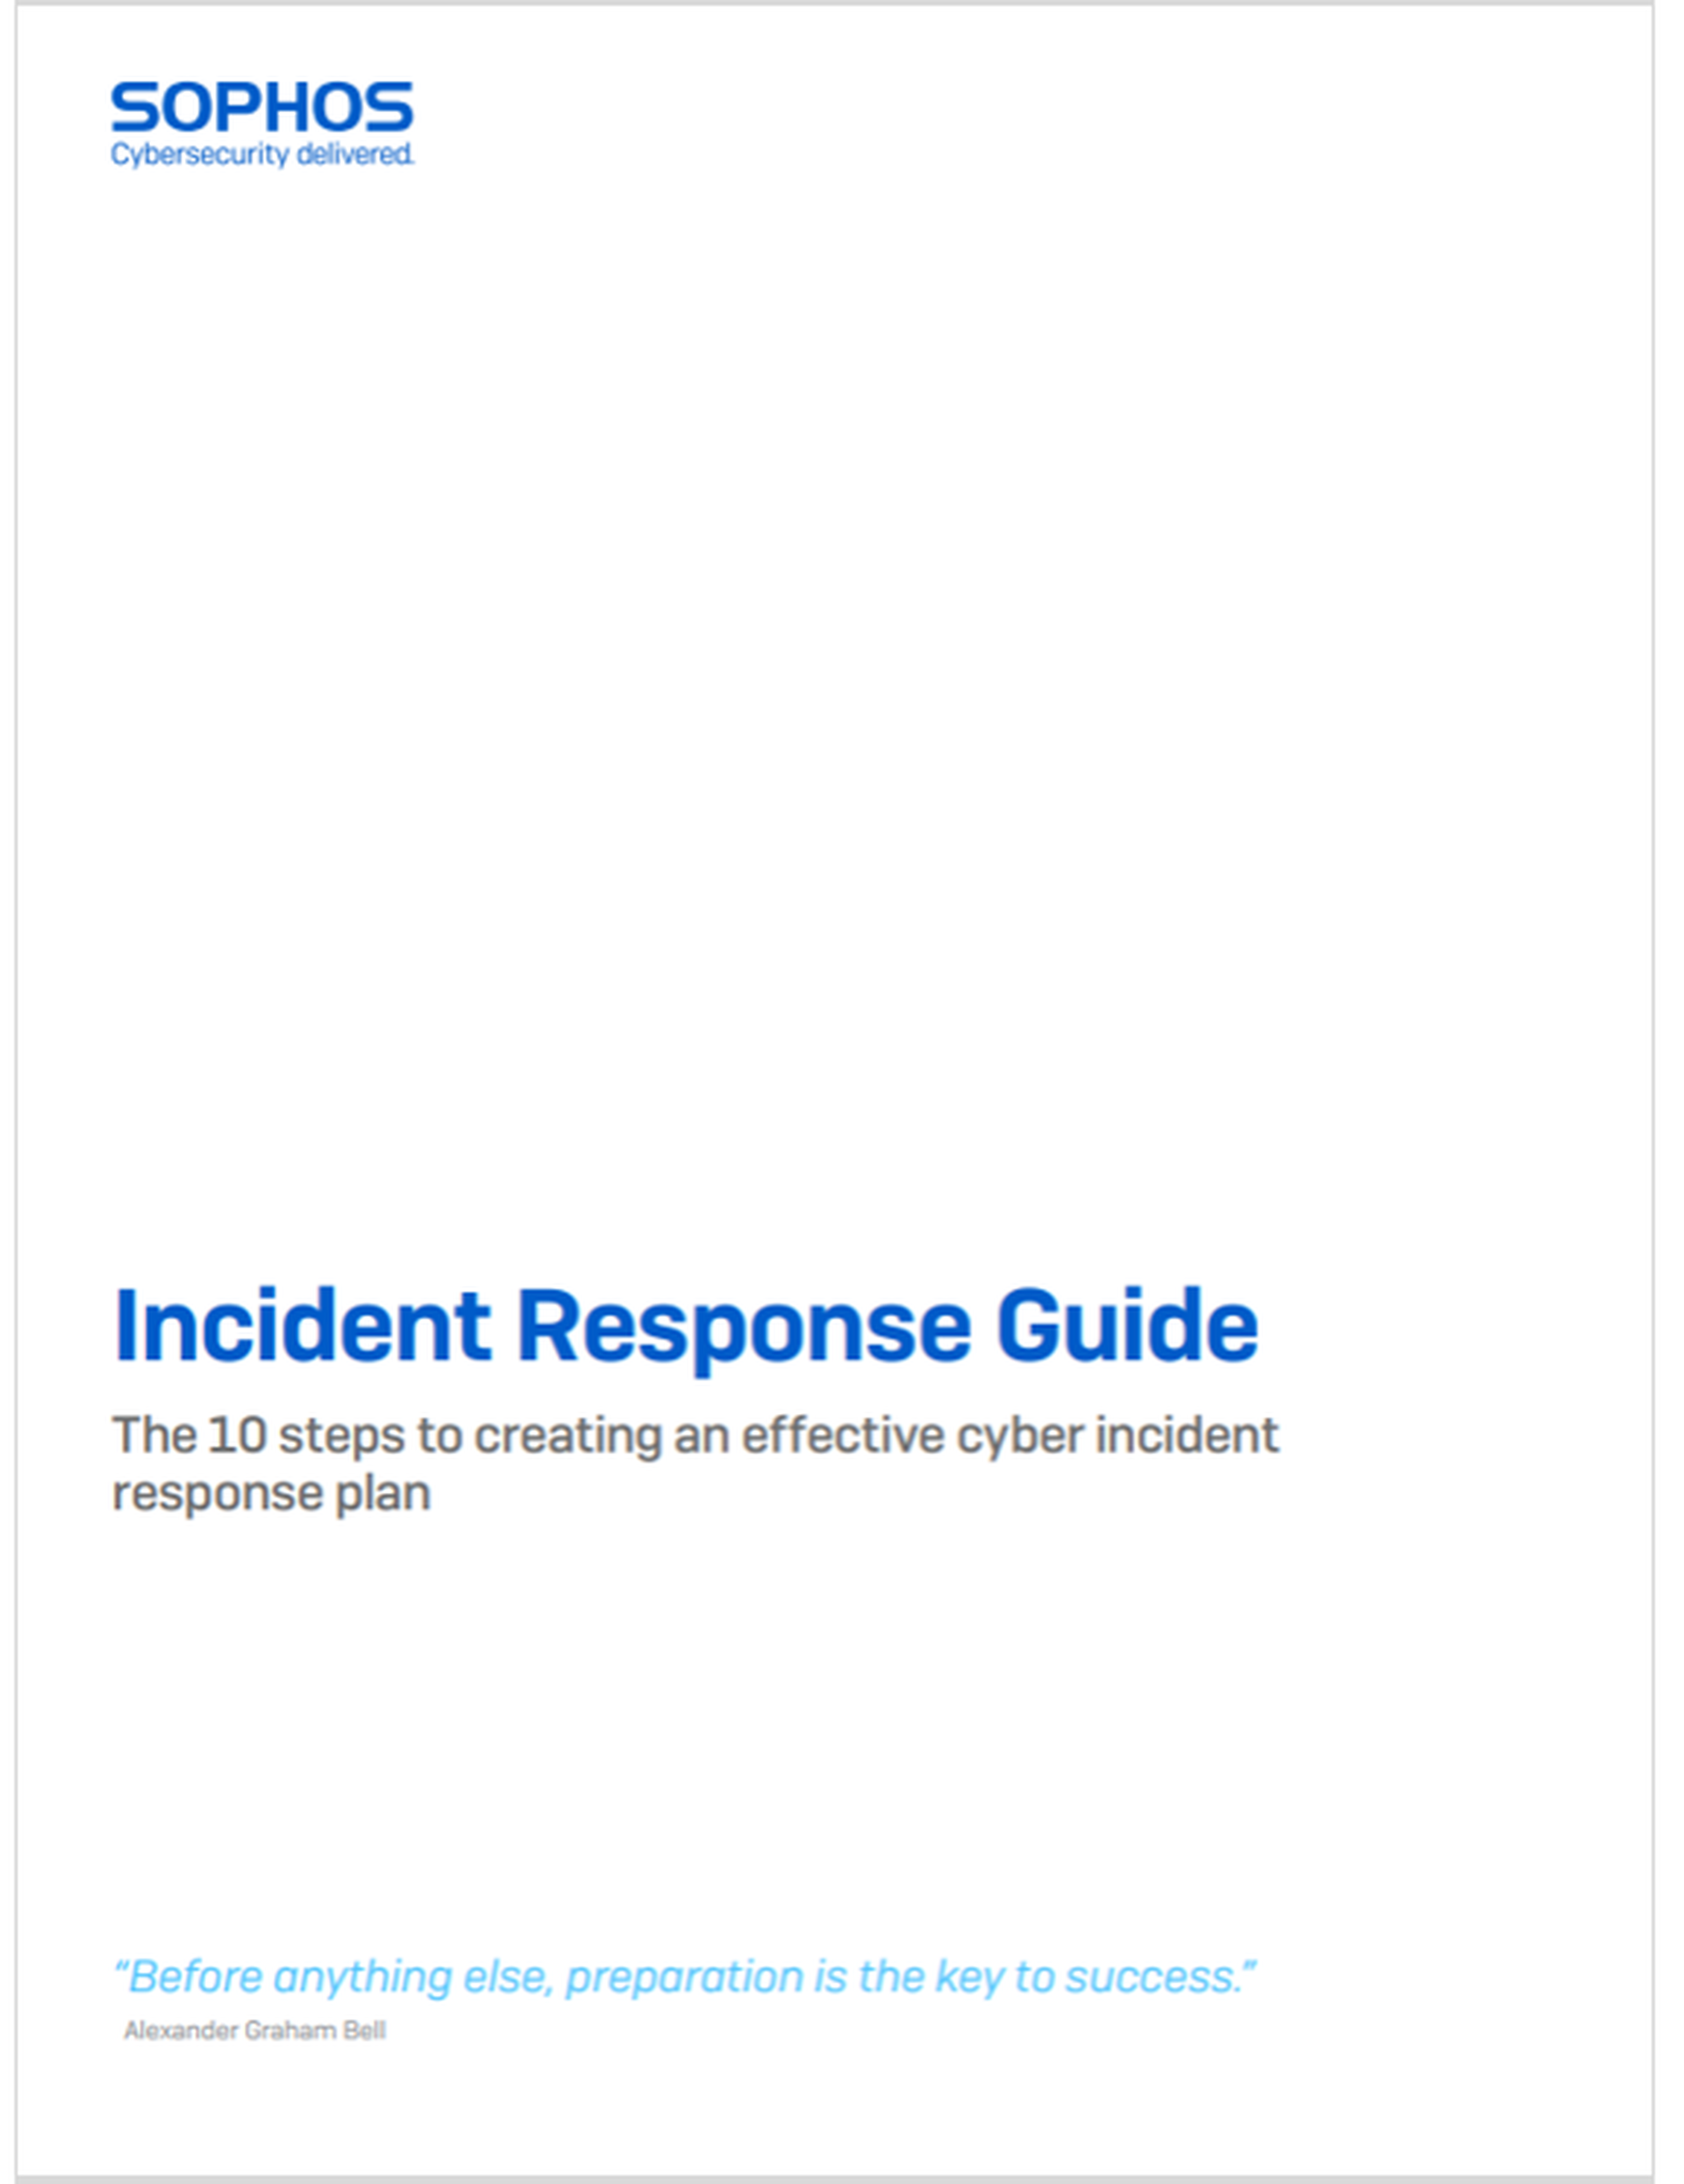 Incident Response Planning Guide